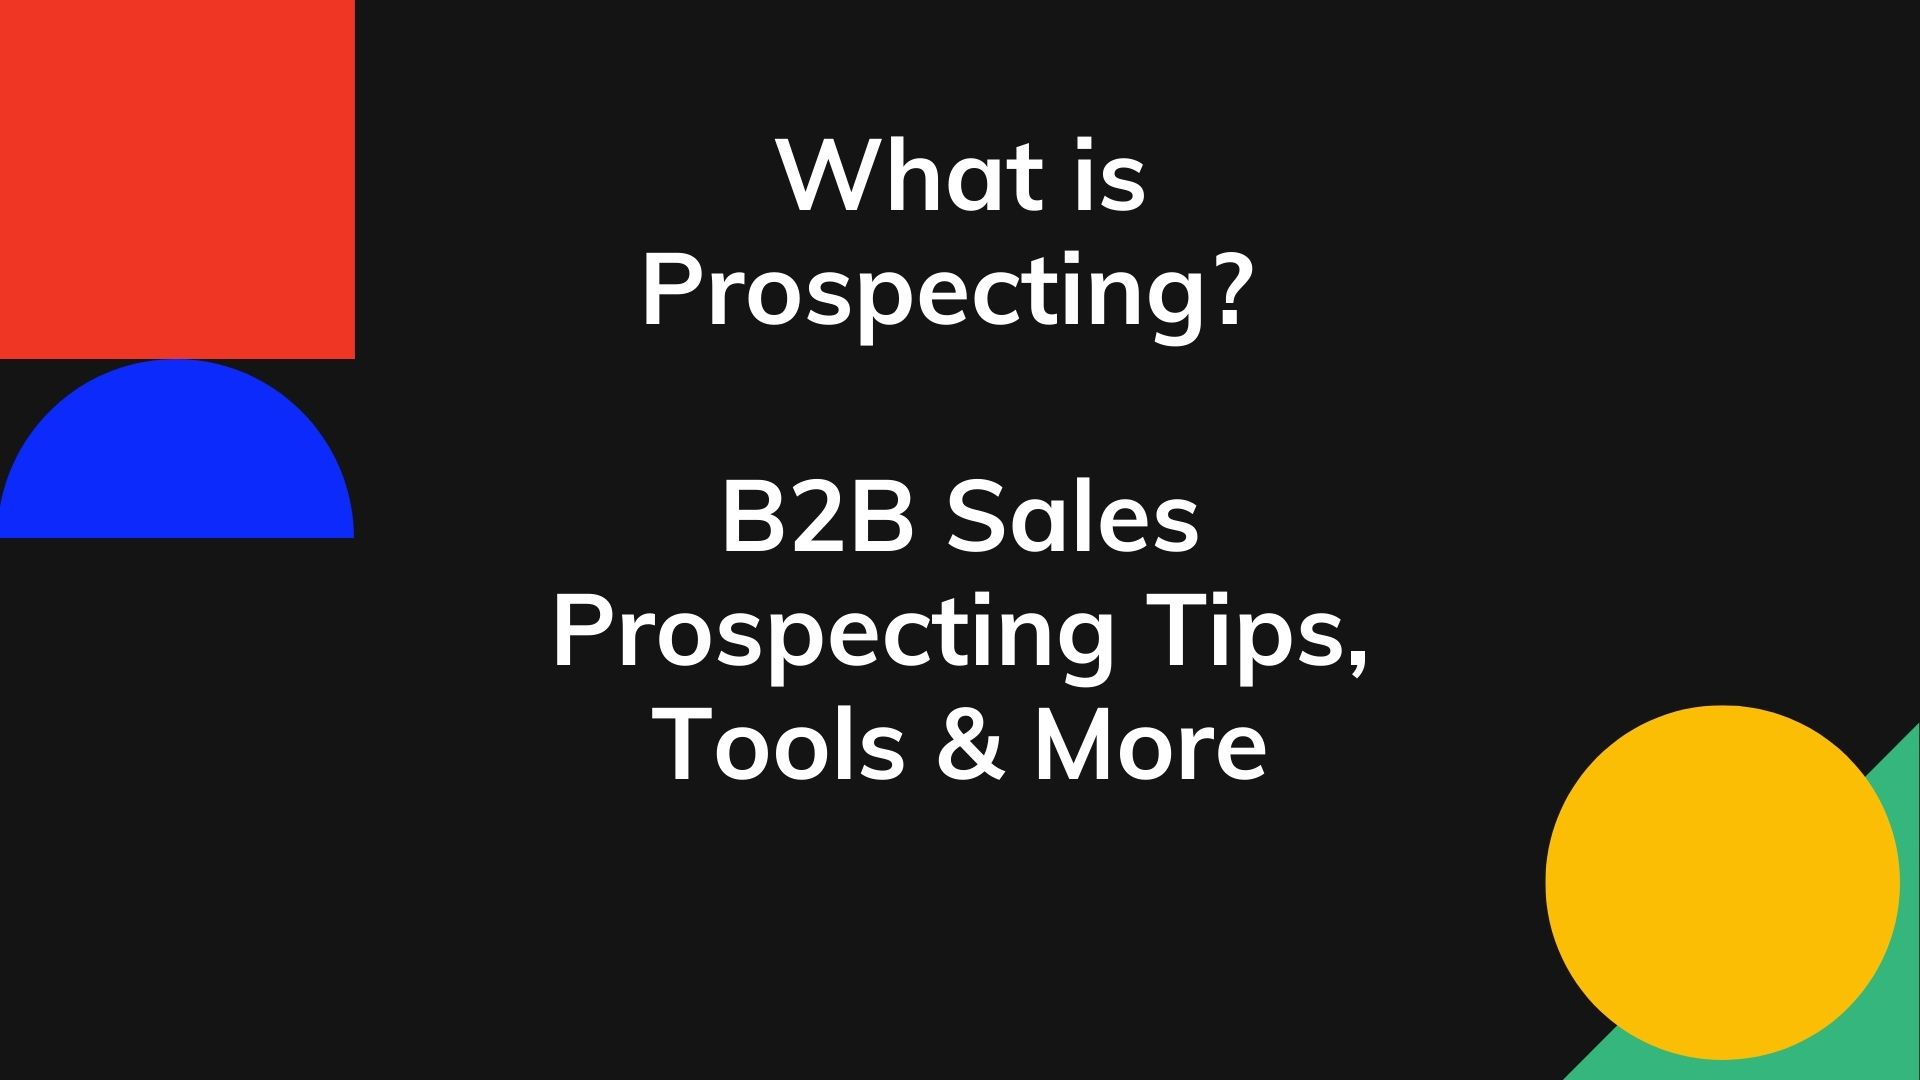 What is prospecting